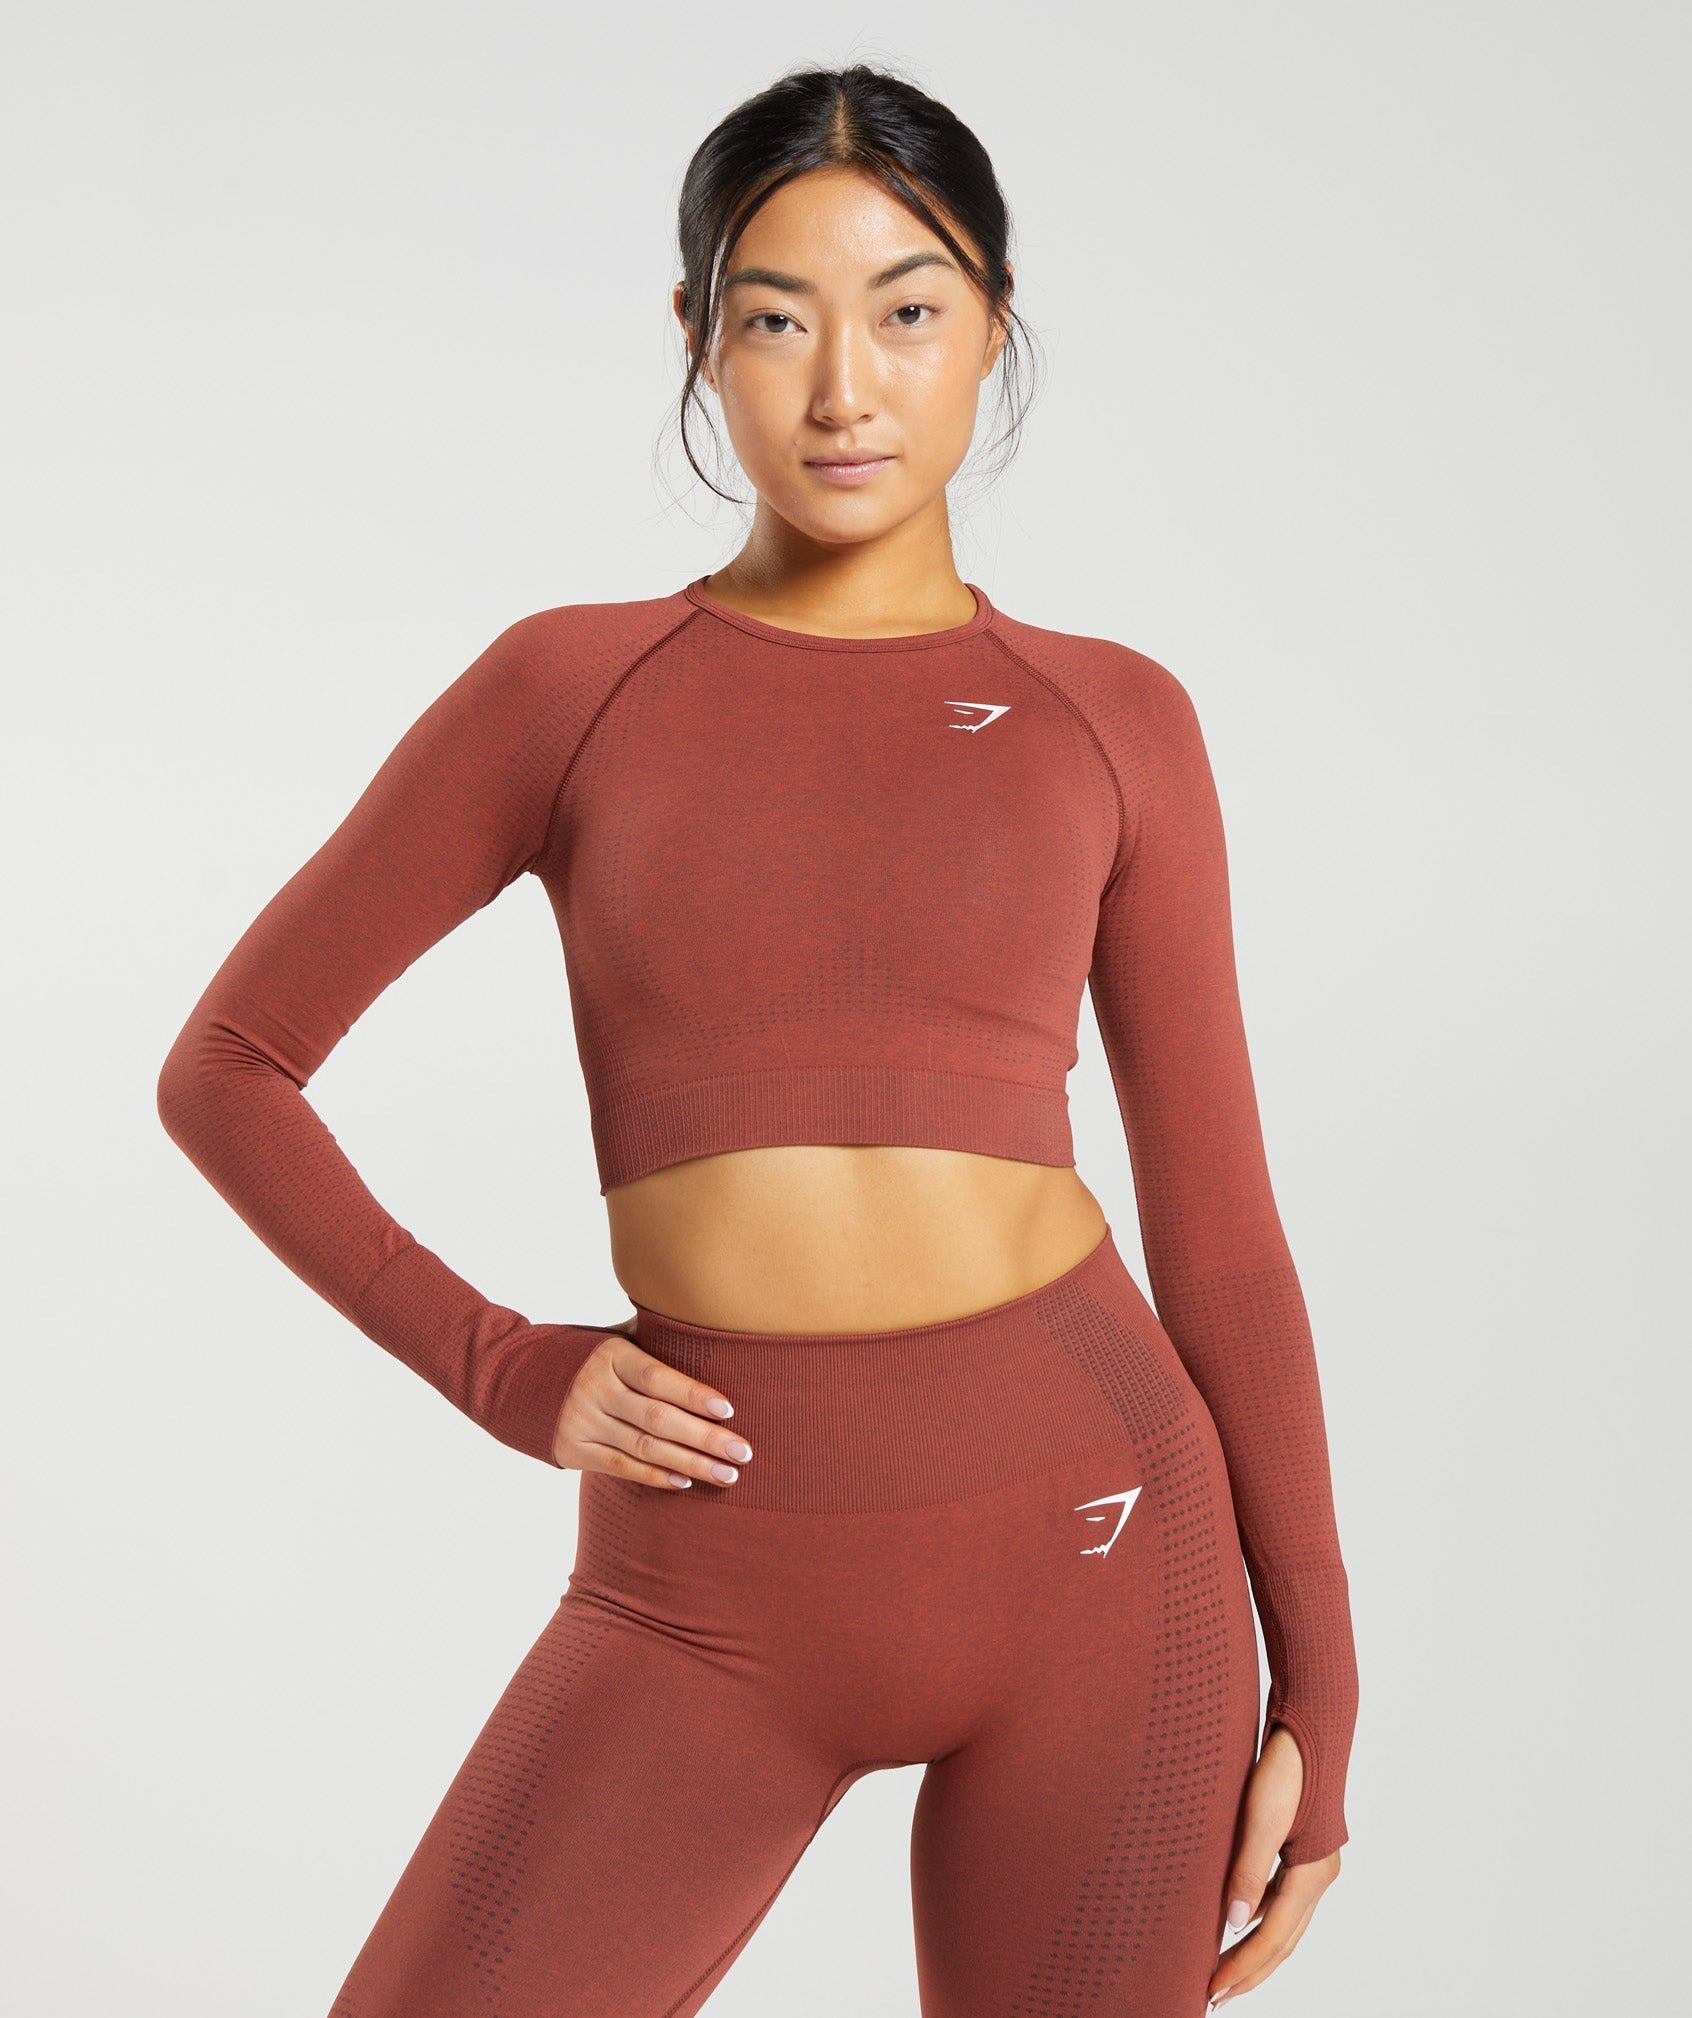 Women's Red Workout Sets - Gymshark